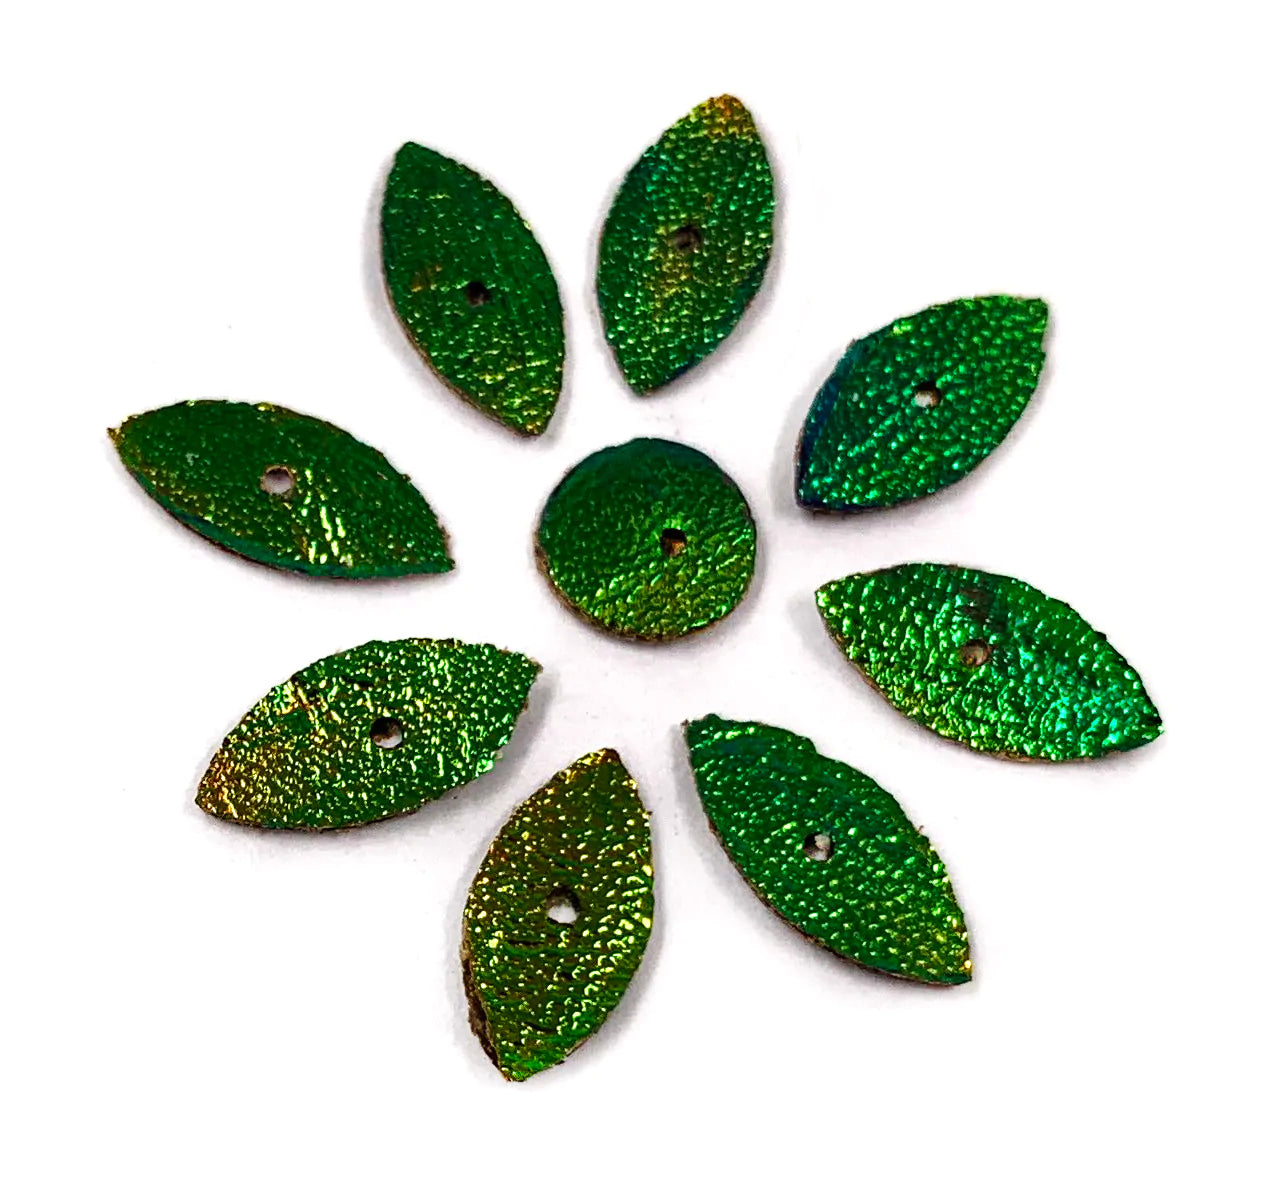 Jewel Beetle Wings UNDRILLED NO-HOLE 100 Pcs Natural Wings - Circle 3 MM